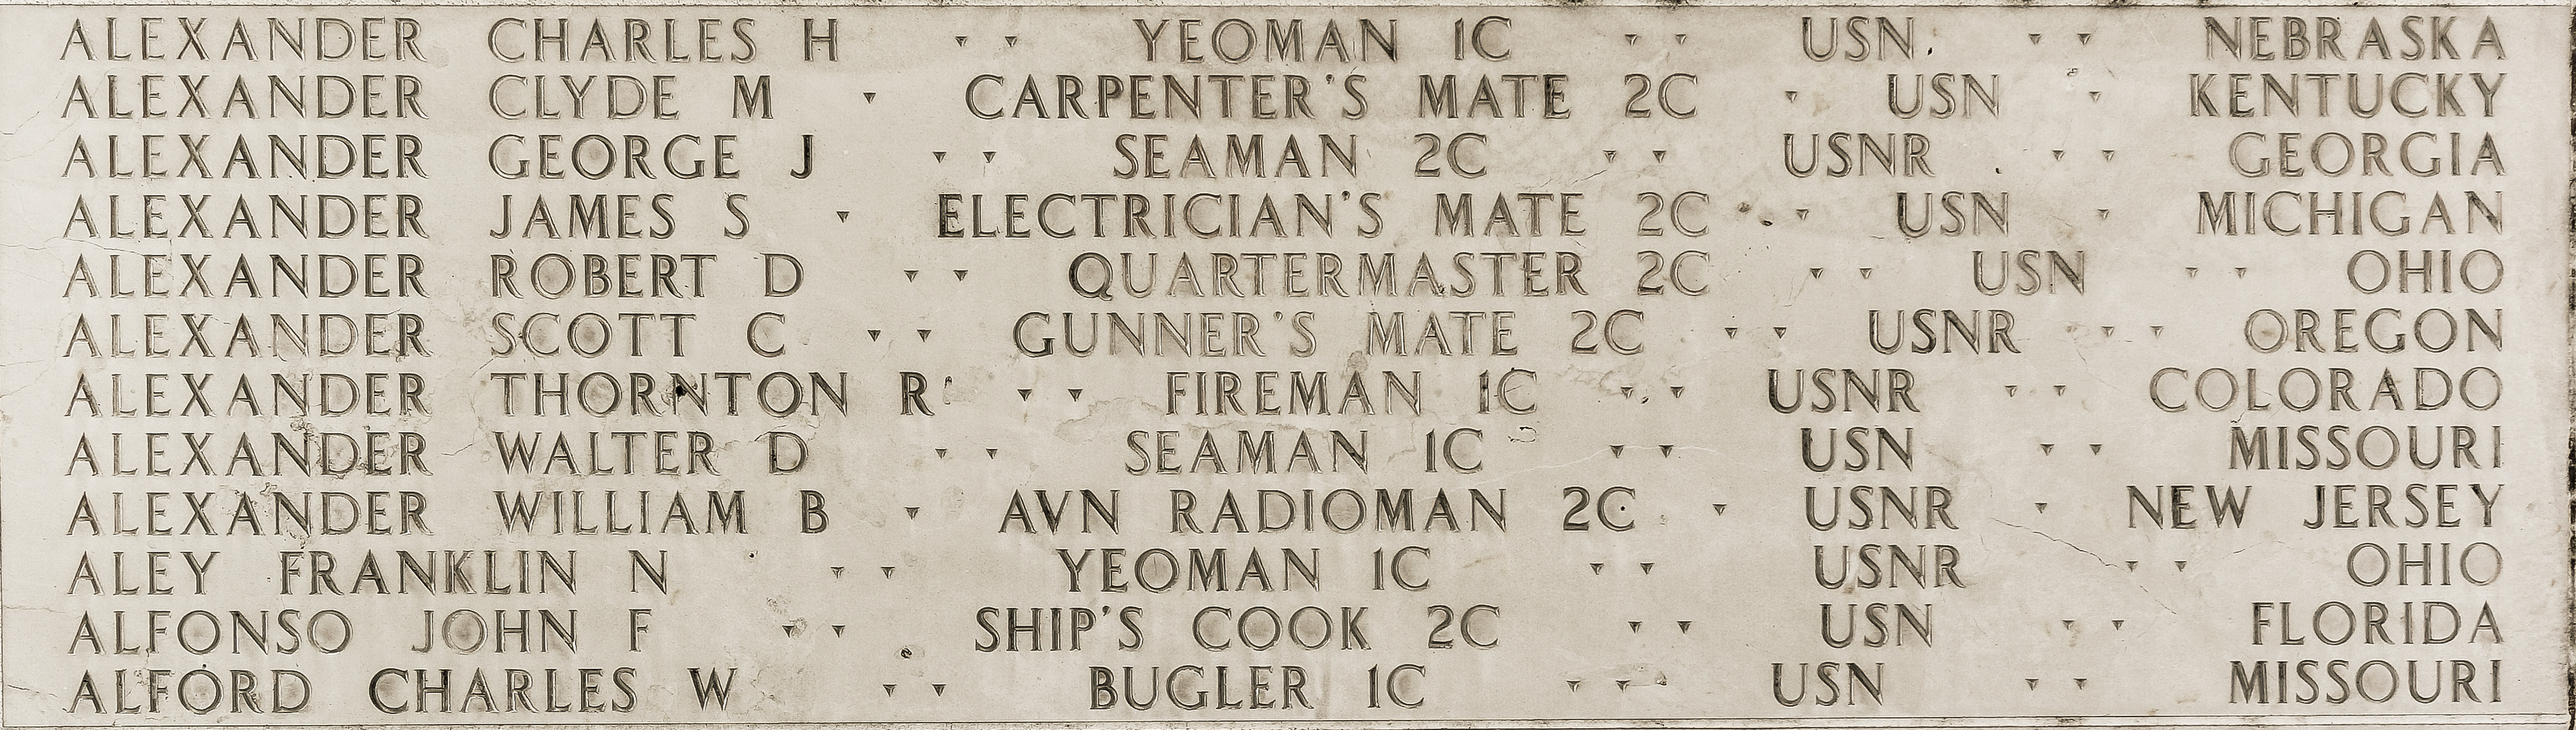 Franklin N. Aley, Yeoman First Class